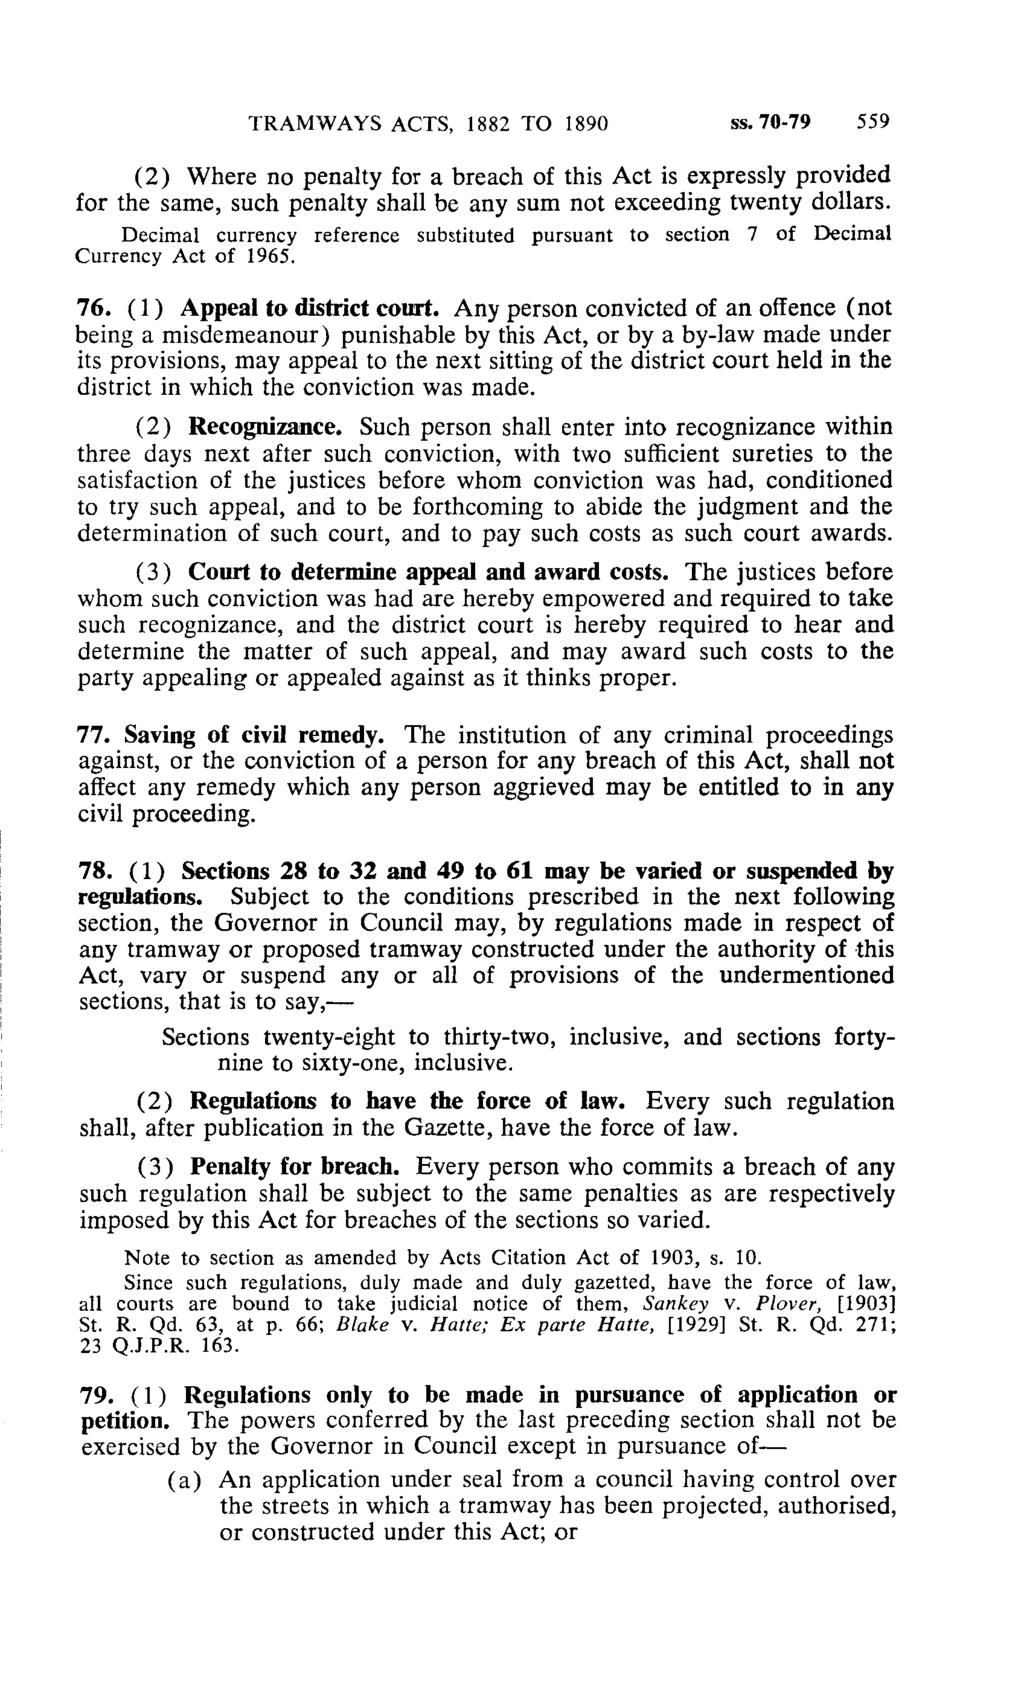 TRAMWAYS ACTS, 1882 TO 1890 ss.70-79 559 (2) Where no penalty for a breach of this Act is expressly provided for the same, such penalty shall be any sum not exceeding twenty dollars.